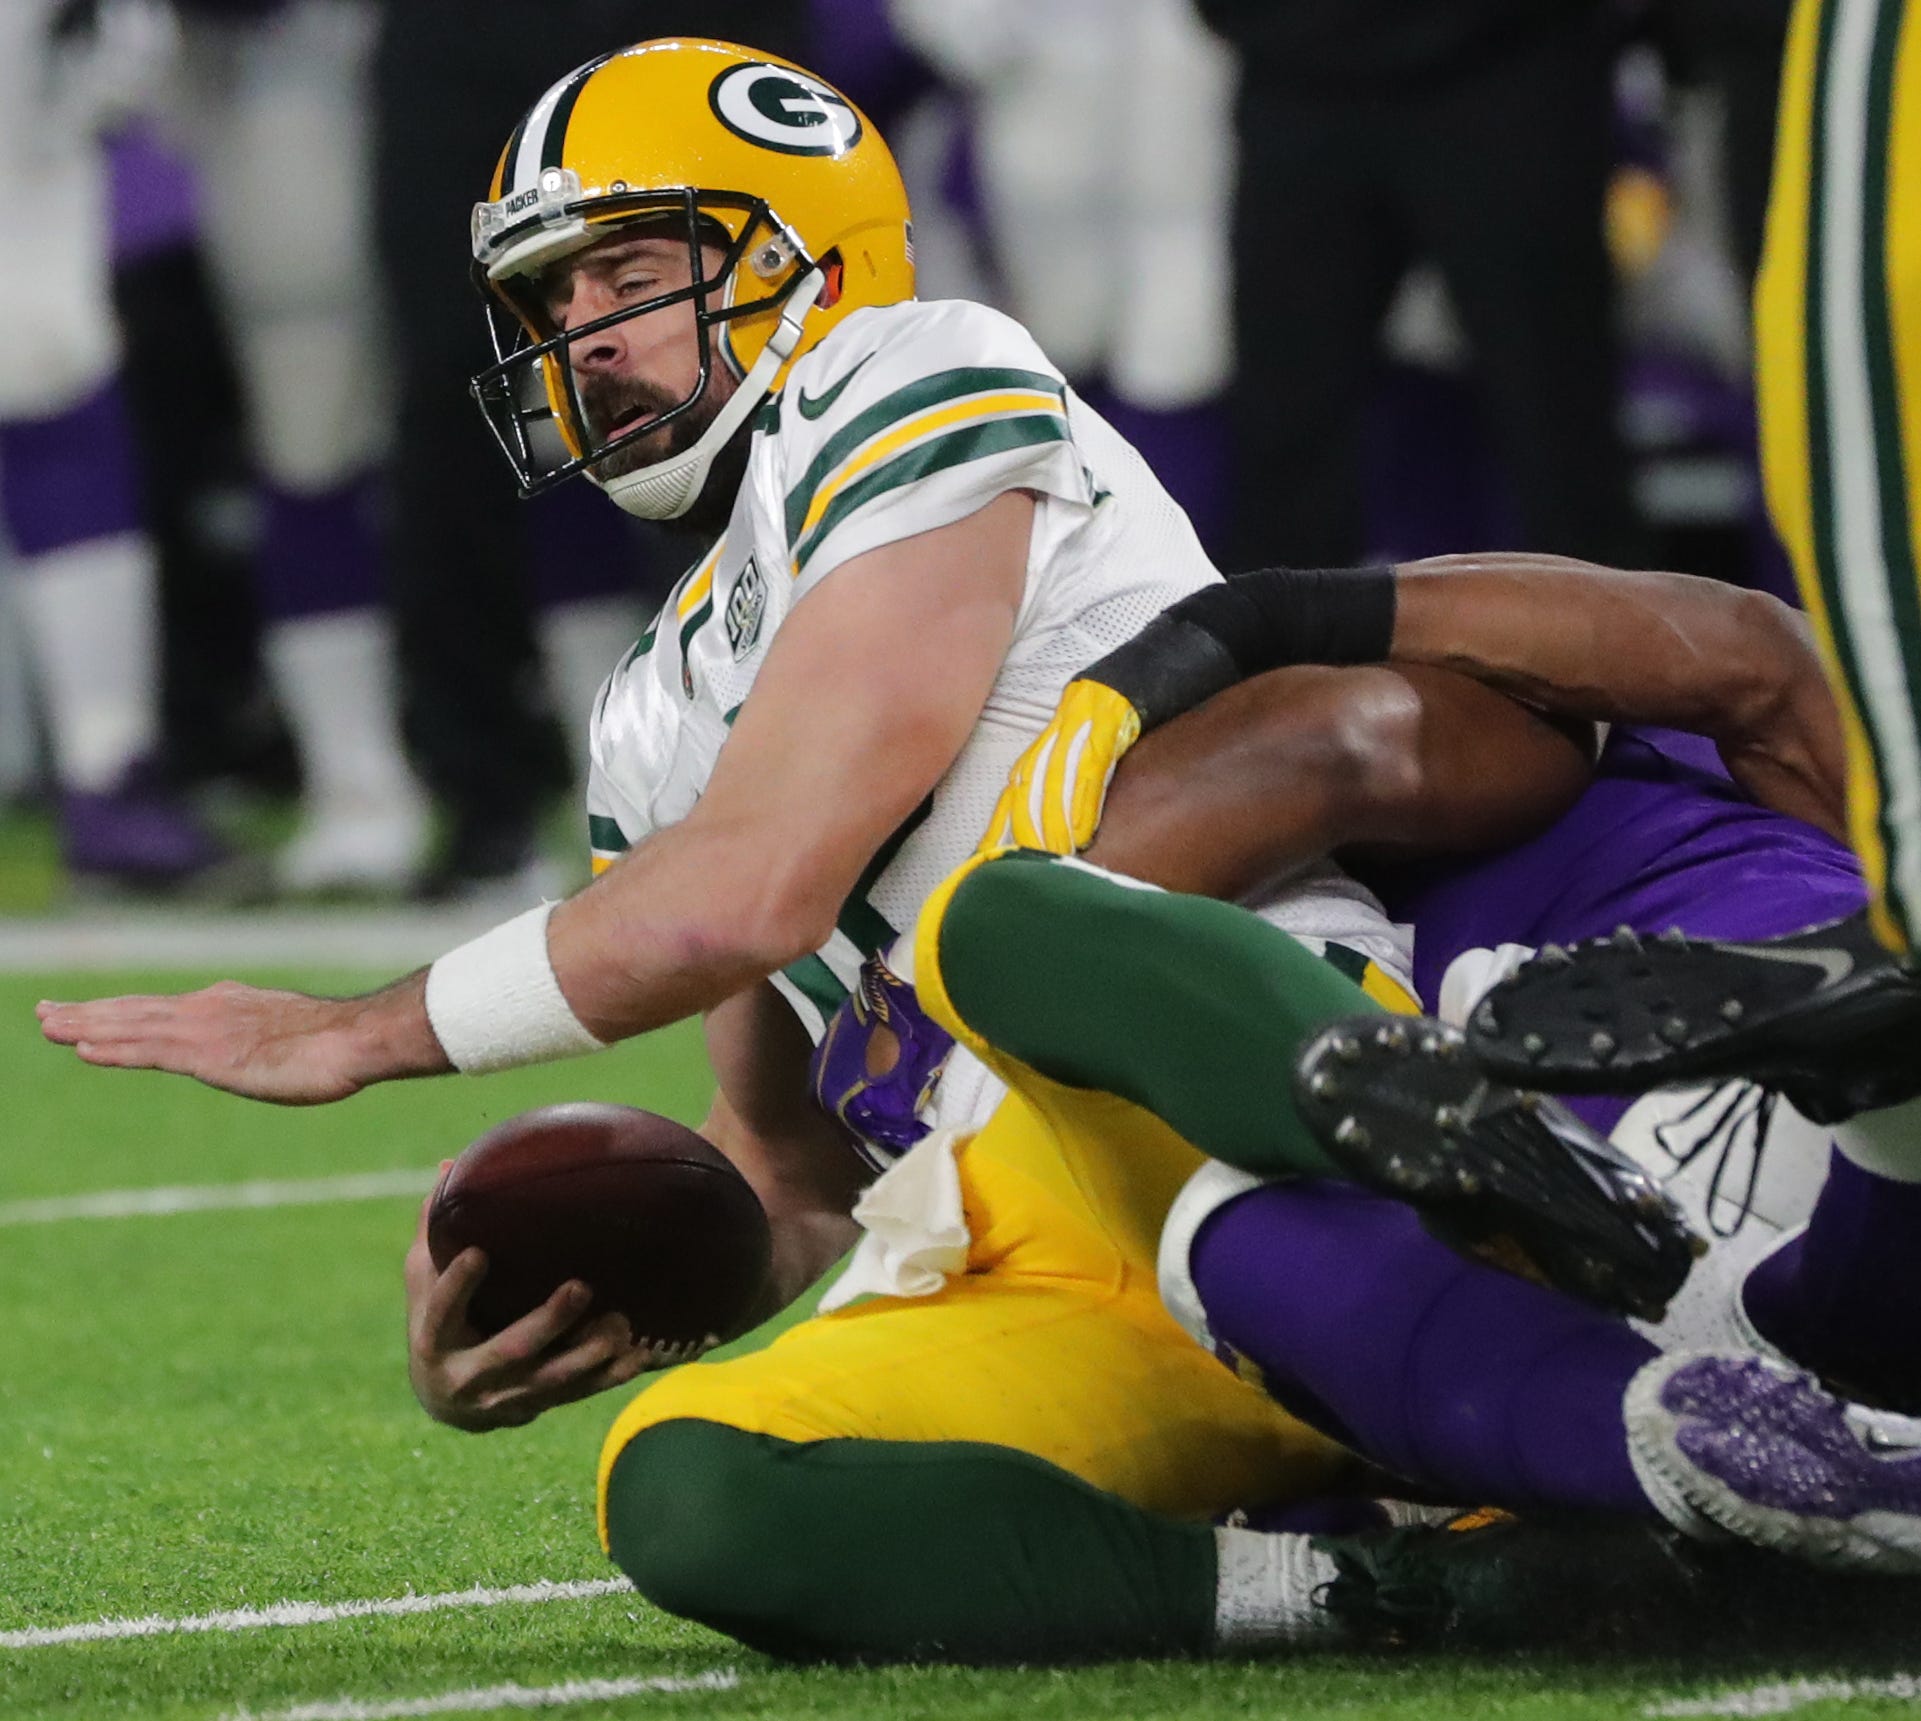 Green Bay Packers quarterback Aaron Rodgers (12) is sacked during the second quarter of their game against the Minnesota Vikings Sunday, November 25, 2018 at U.S. Bank Stadium in Minneapolis, Minn.

MARK HOFFMAN/MHOFFMAN@JOURNALSENTINEL.COM